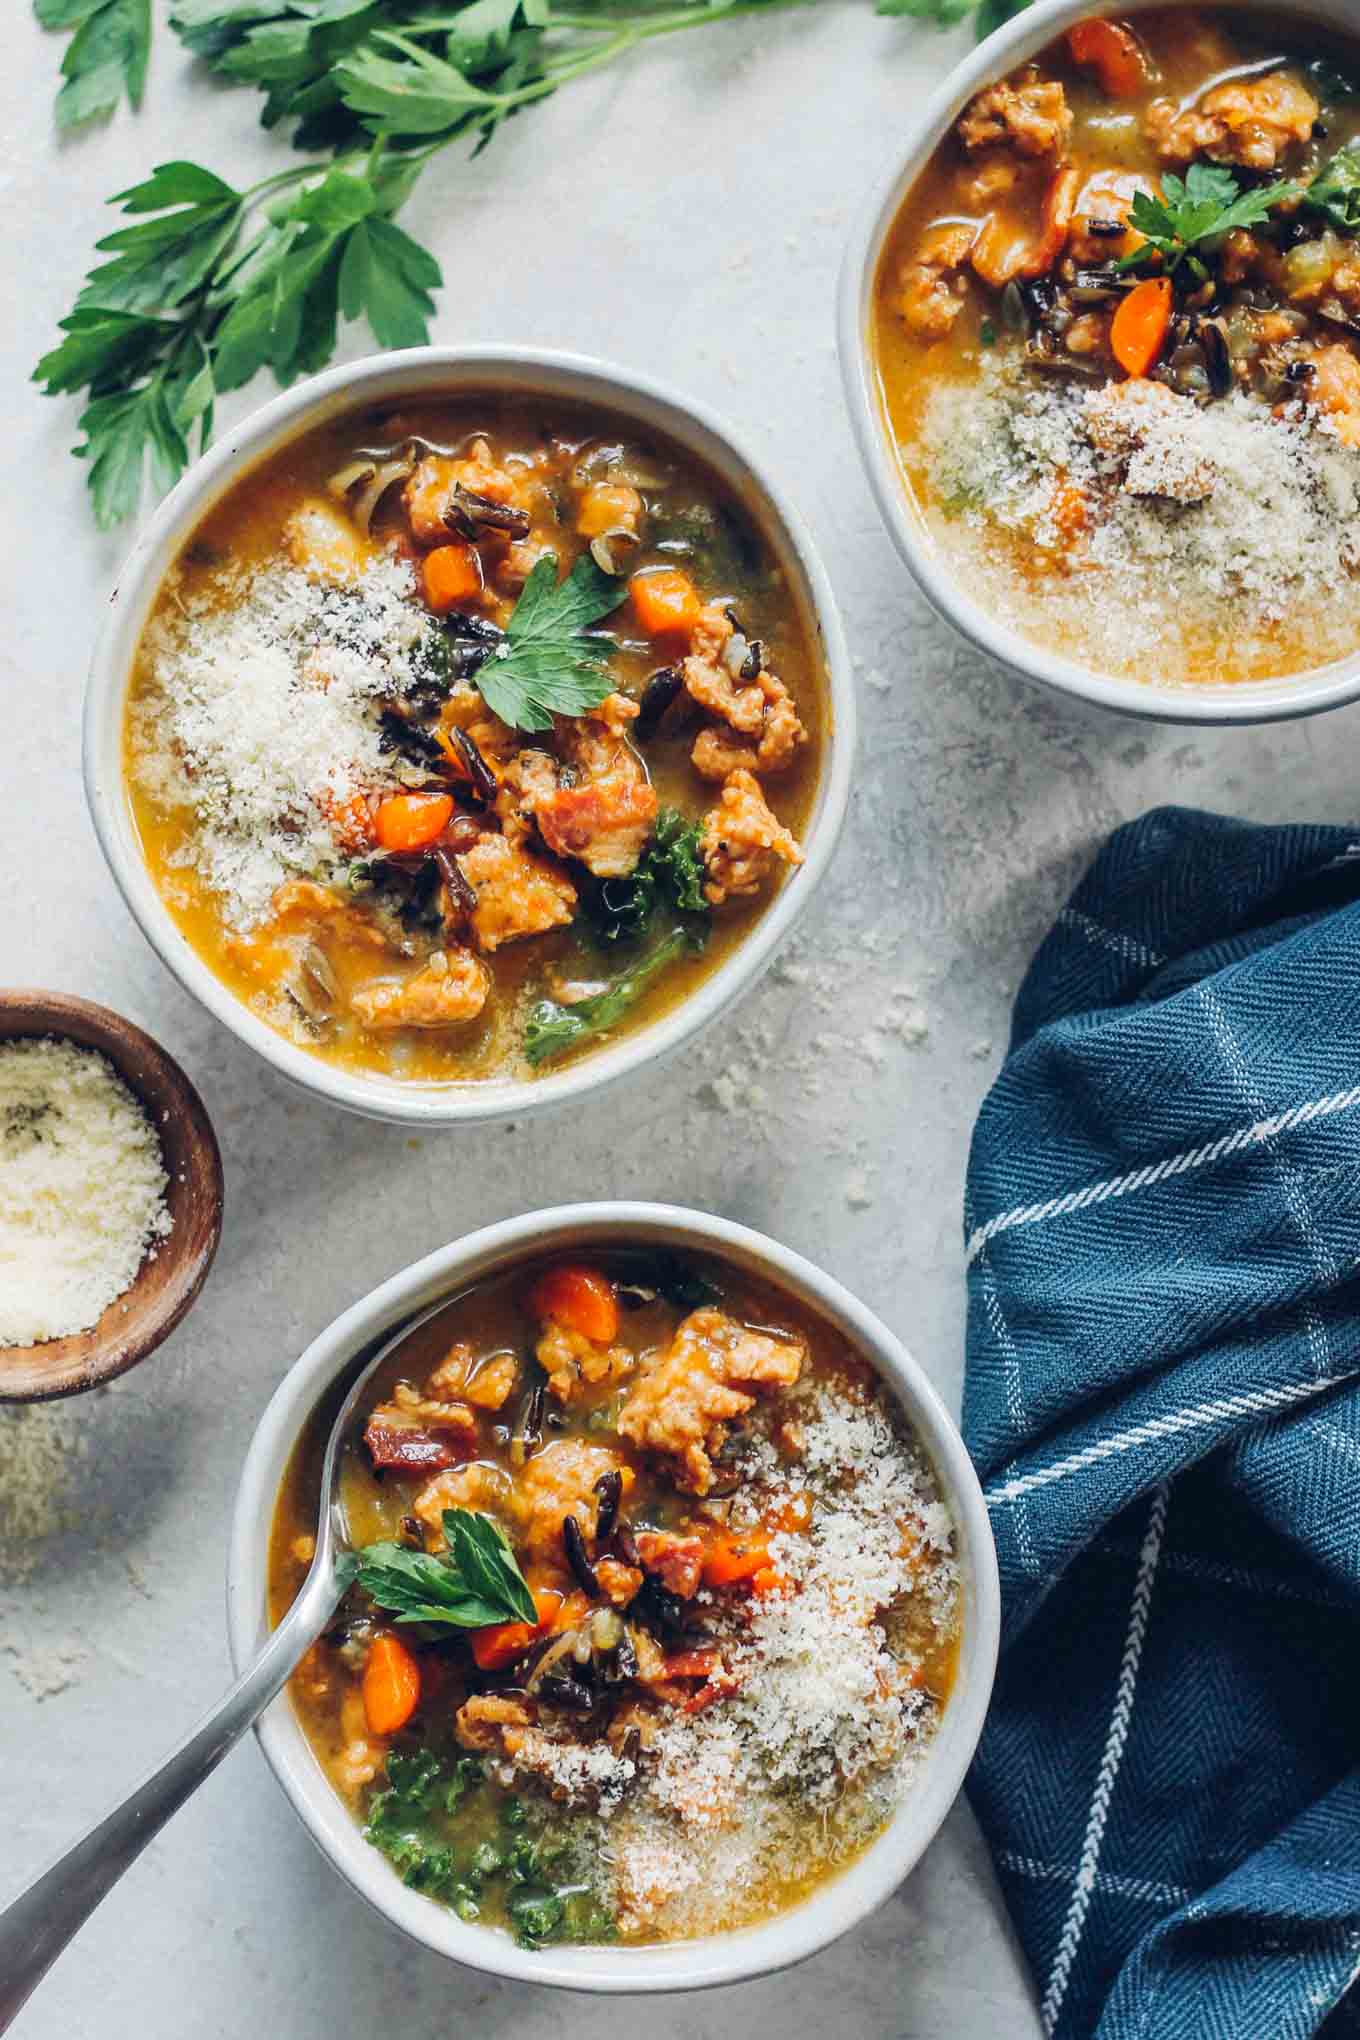 Soup in 3 bowls with parmesan cheese and parsley on the side